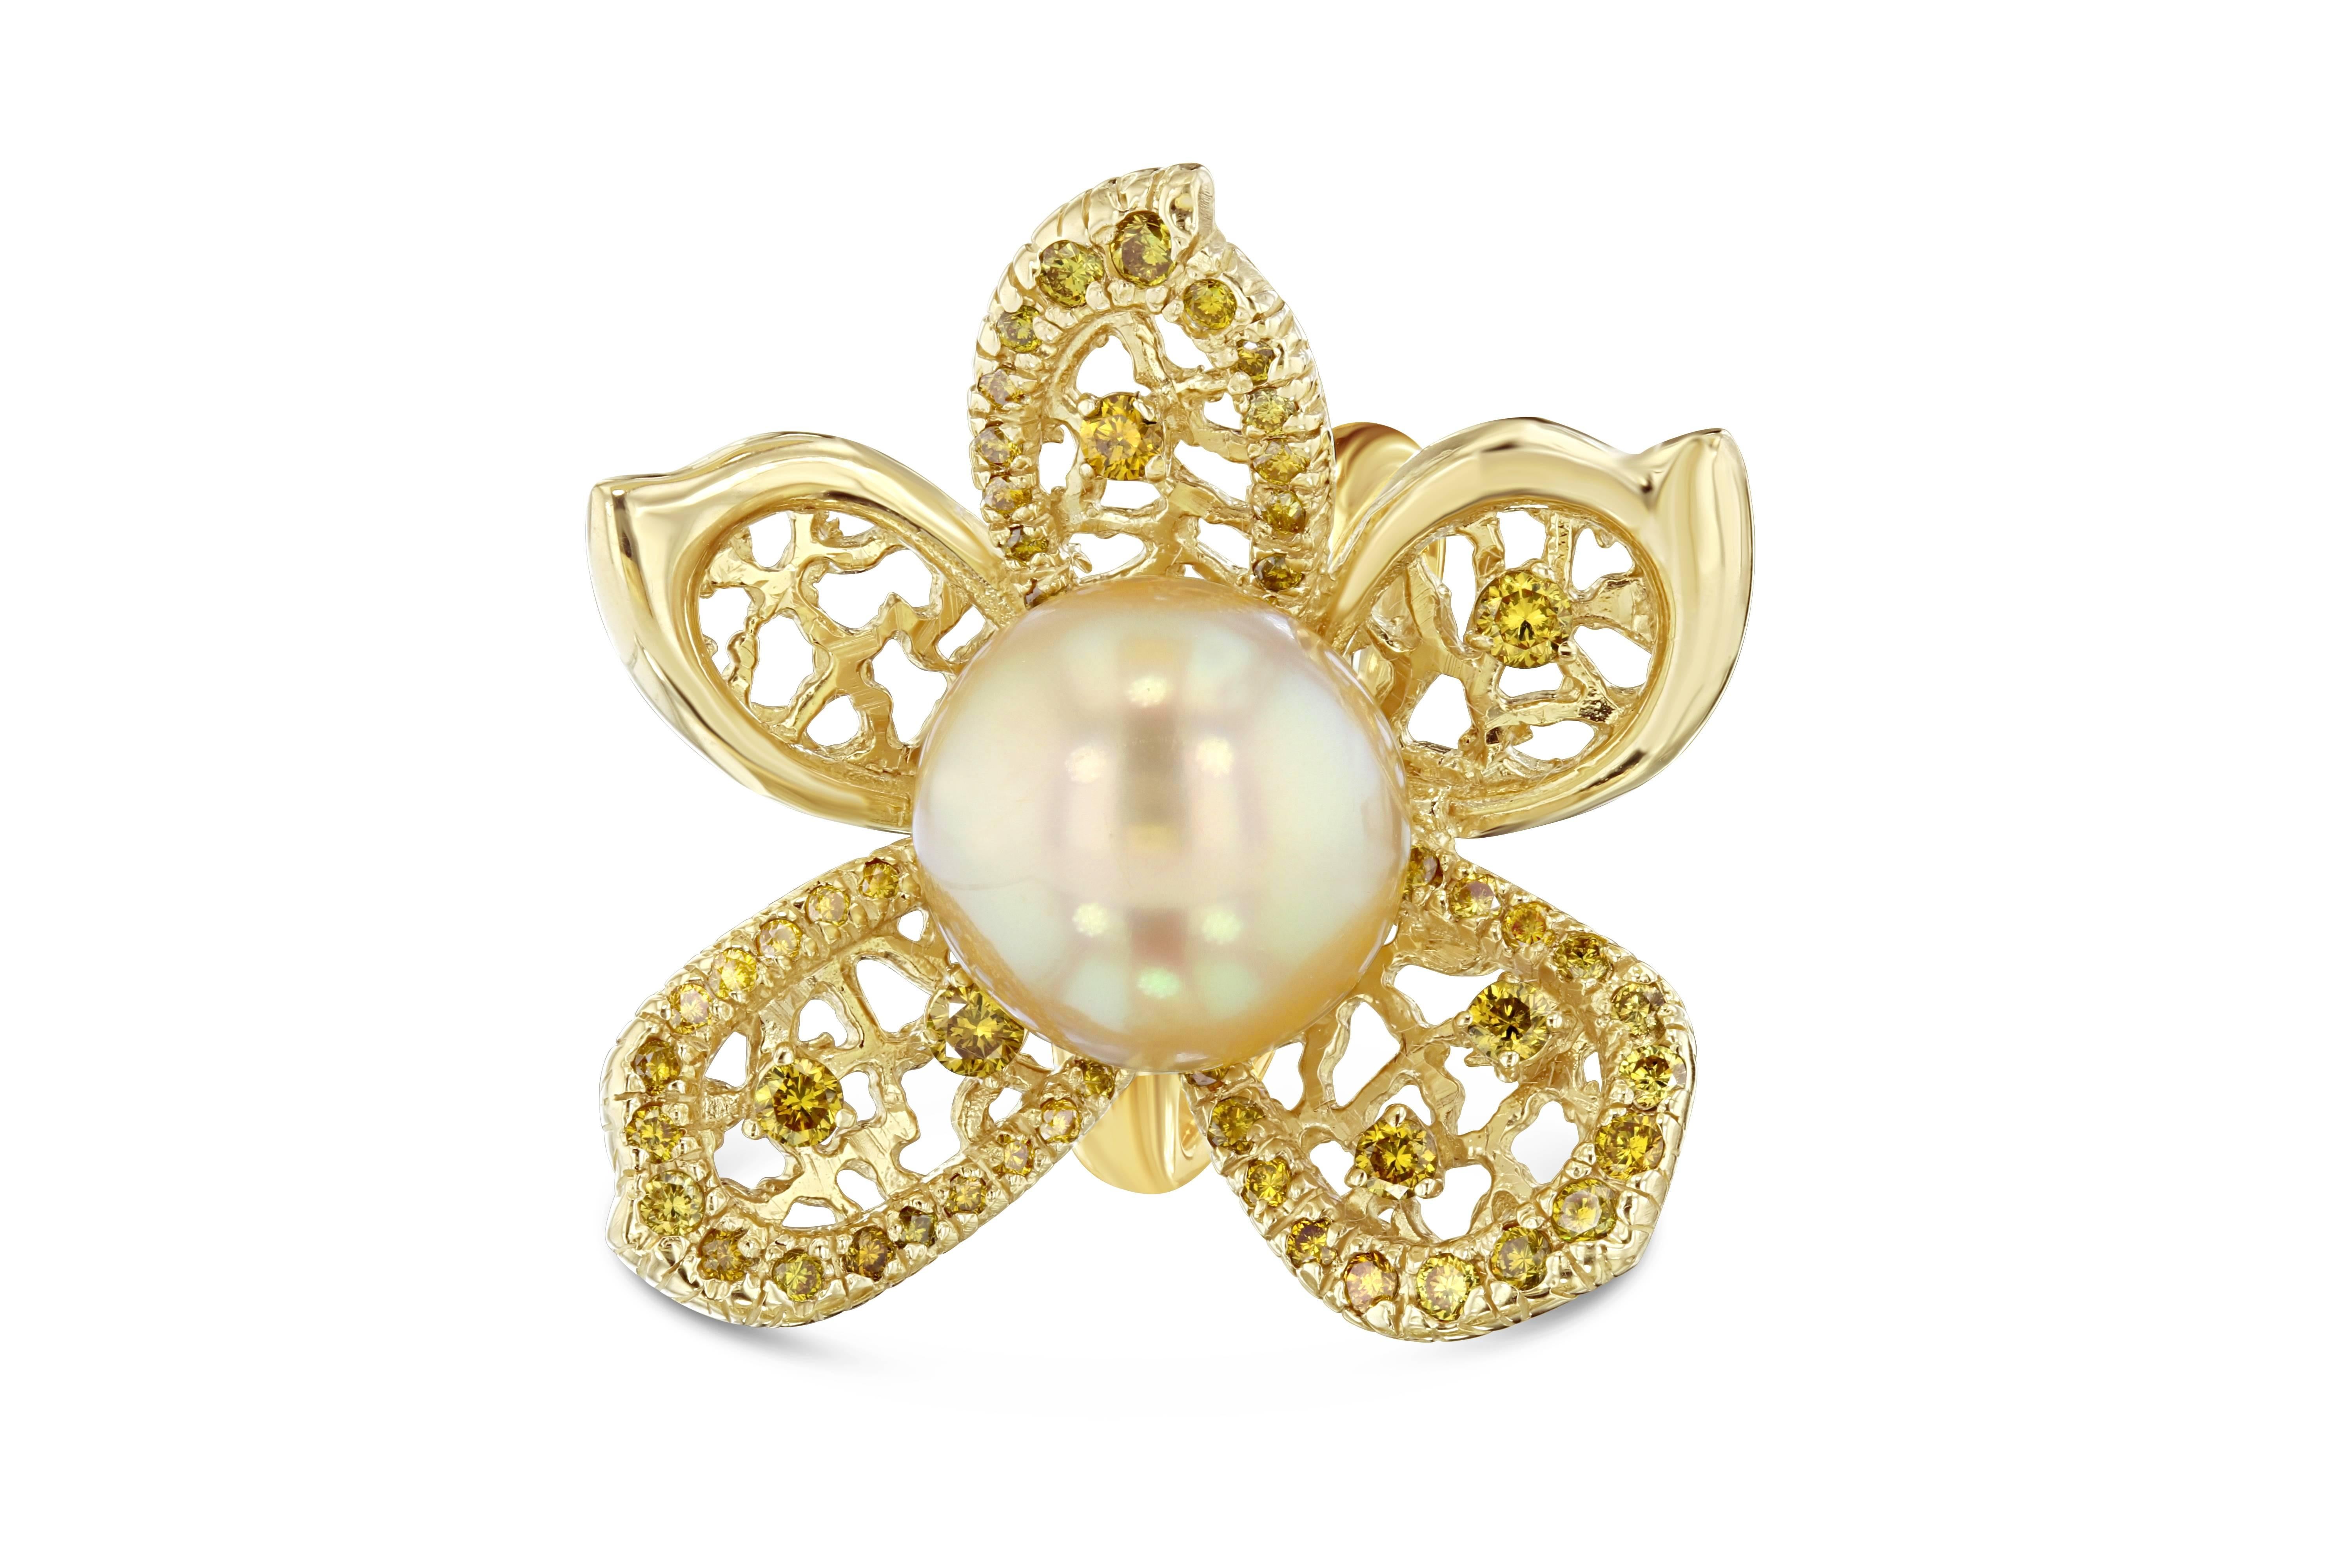 This one of a kind South Sea Pearl Ring will surely stand out in a crowd. It has a 12 mm Golden South Sea Pearl with 58 Round Cut Yellow Diamonds on the petals weighing 0.92 Carats. The yellow diamonds are natural and a fancy yellow color with the